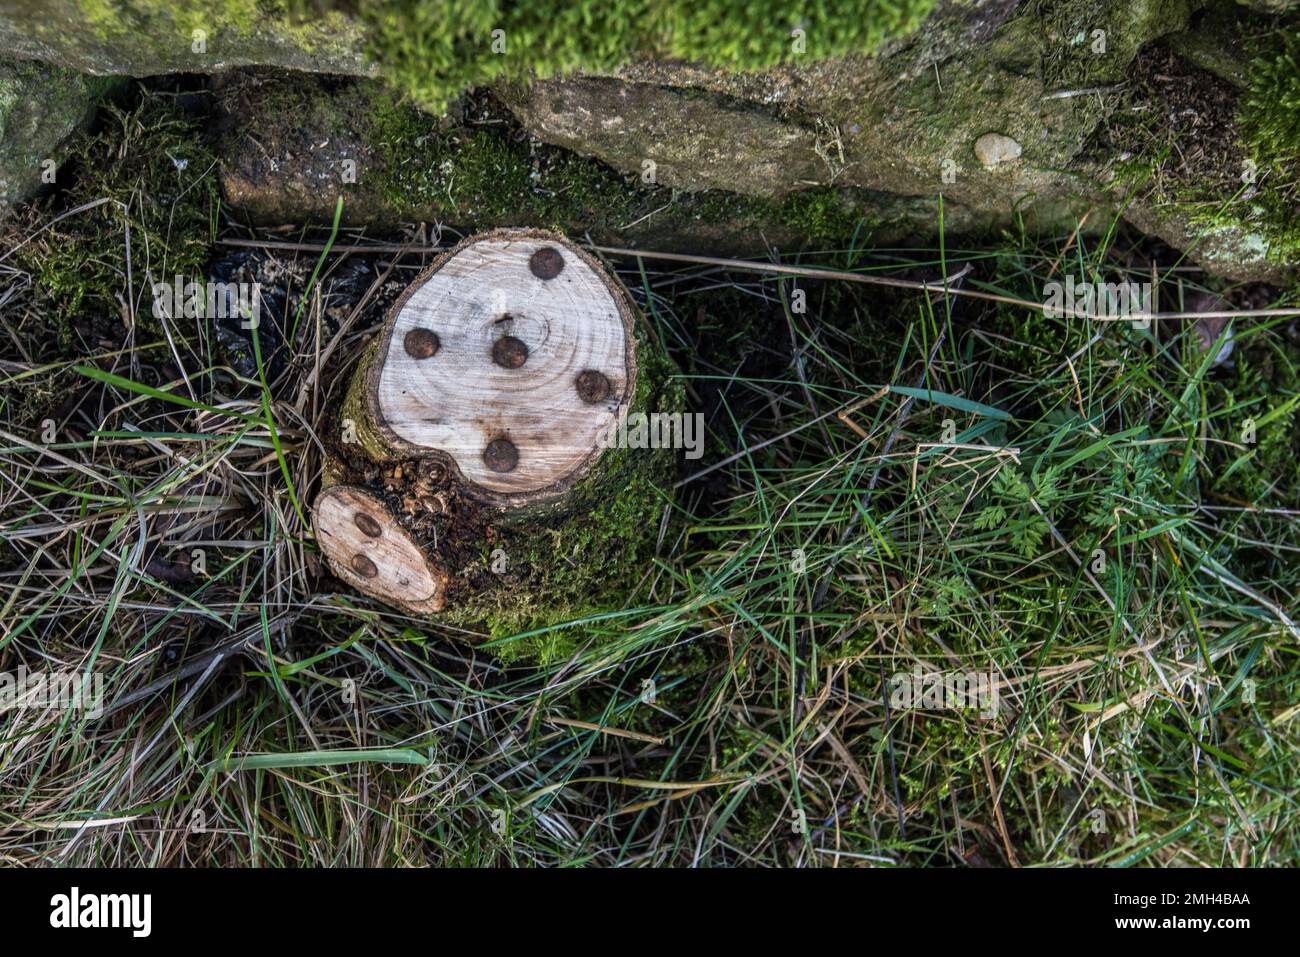 copper nails hammered into stumps along the leeds liverpool canal near gargravethis may be with a view to enabling decaydeath of the stump 2MH4BAA